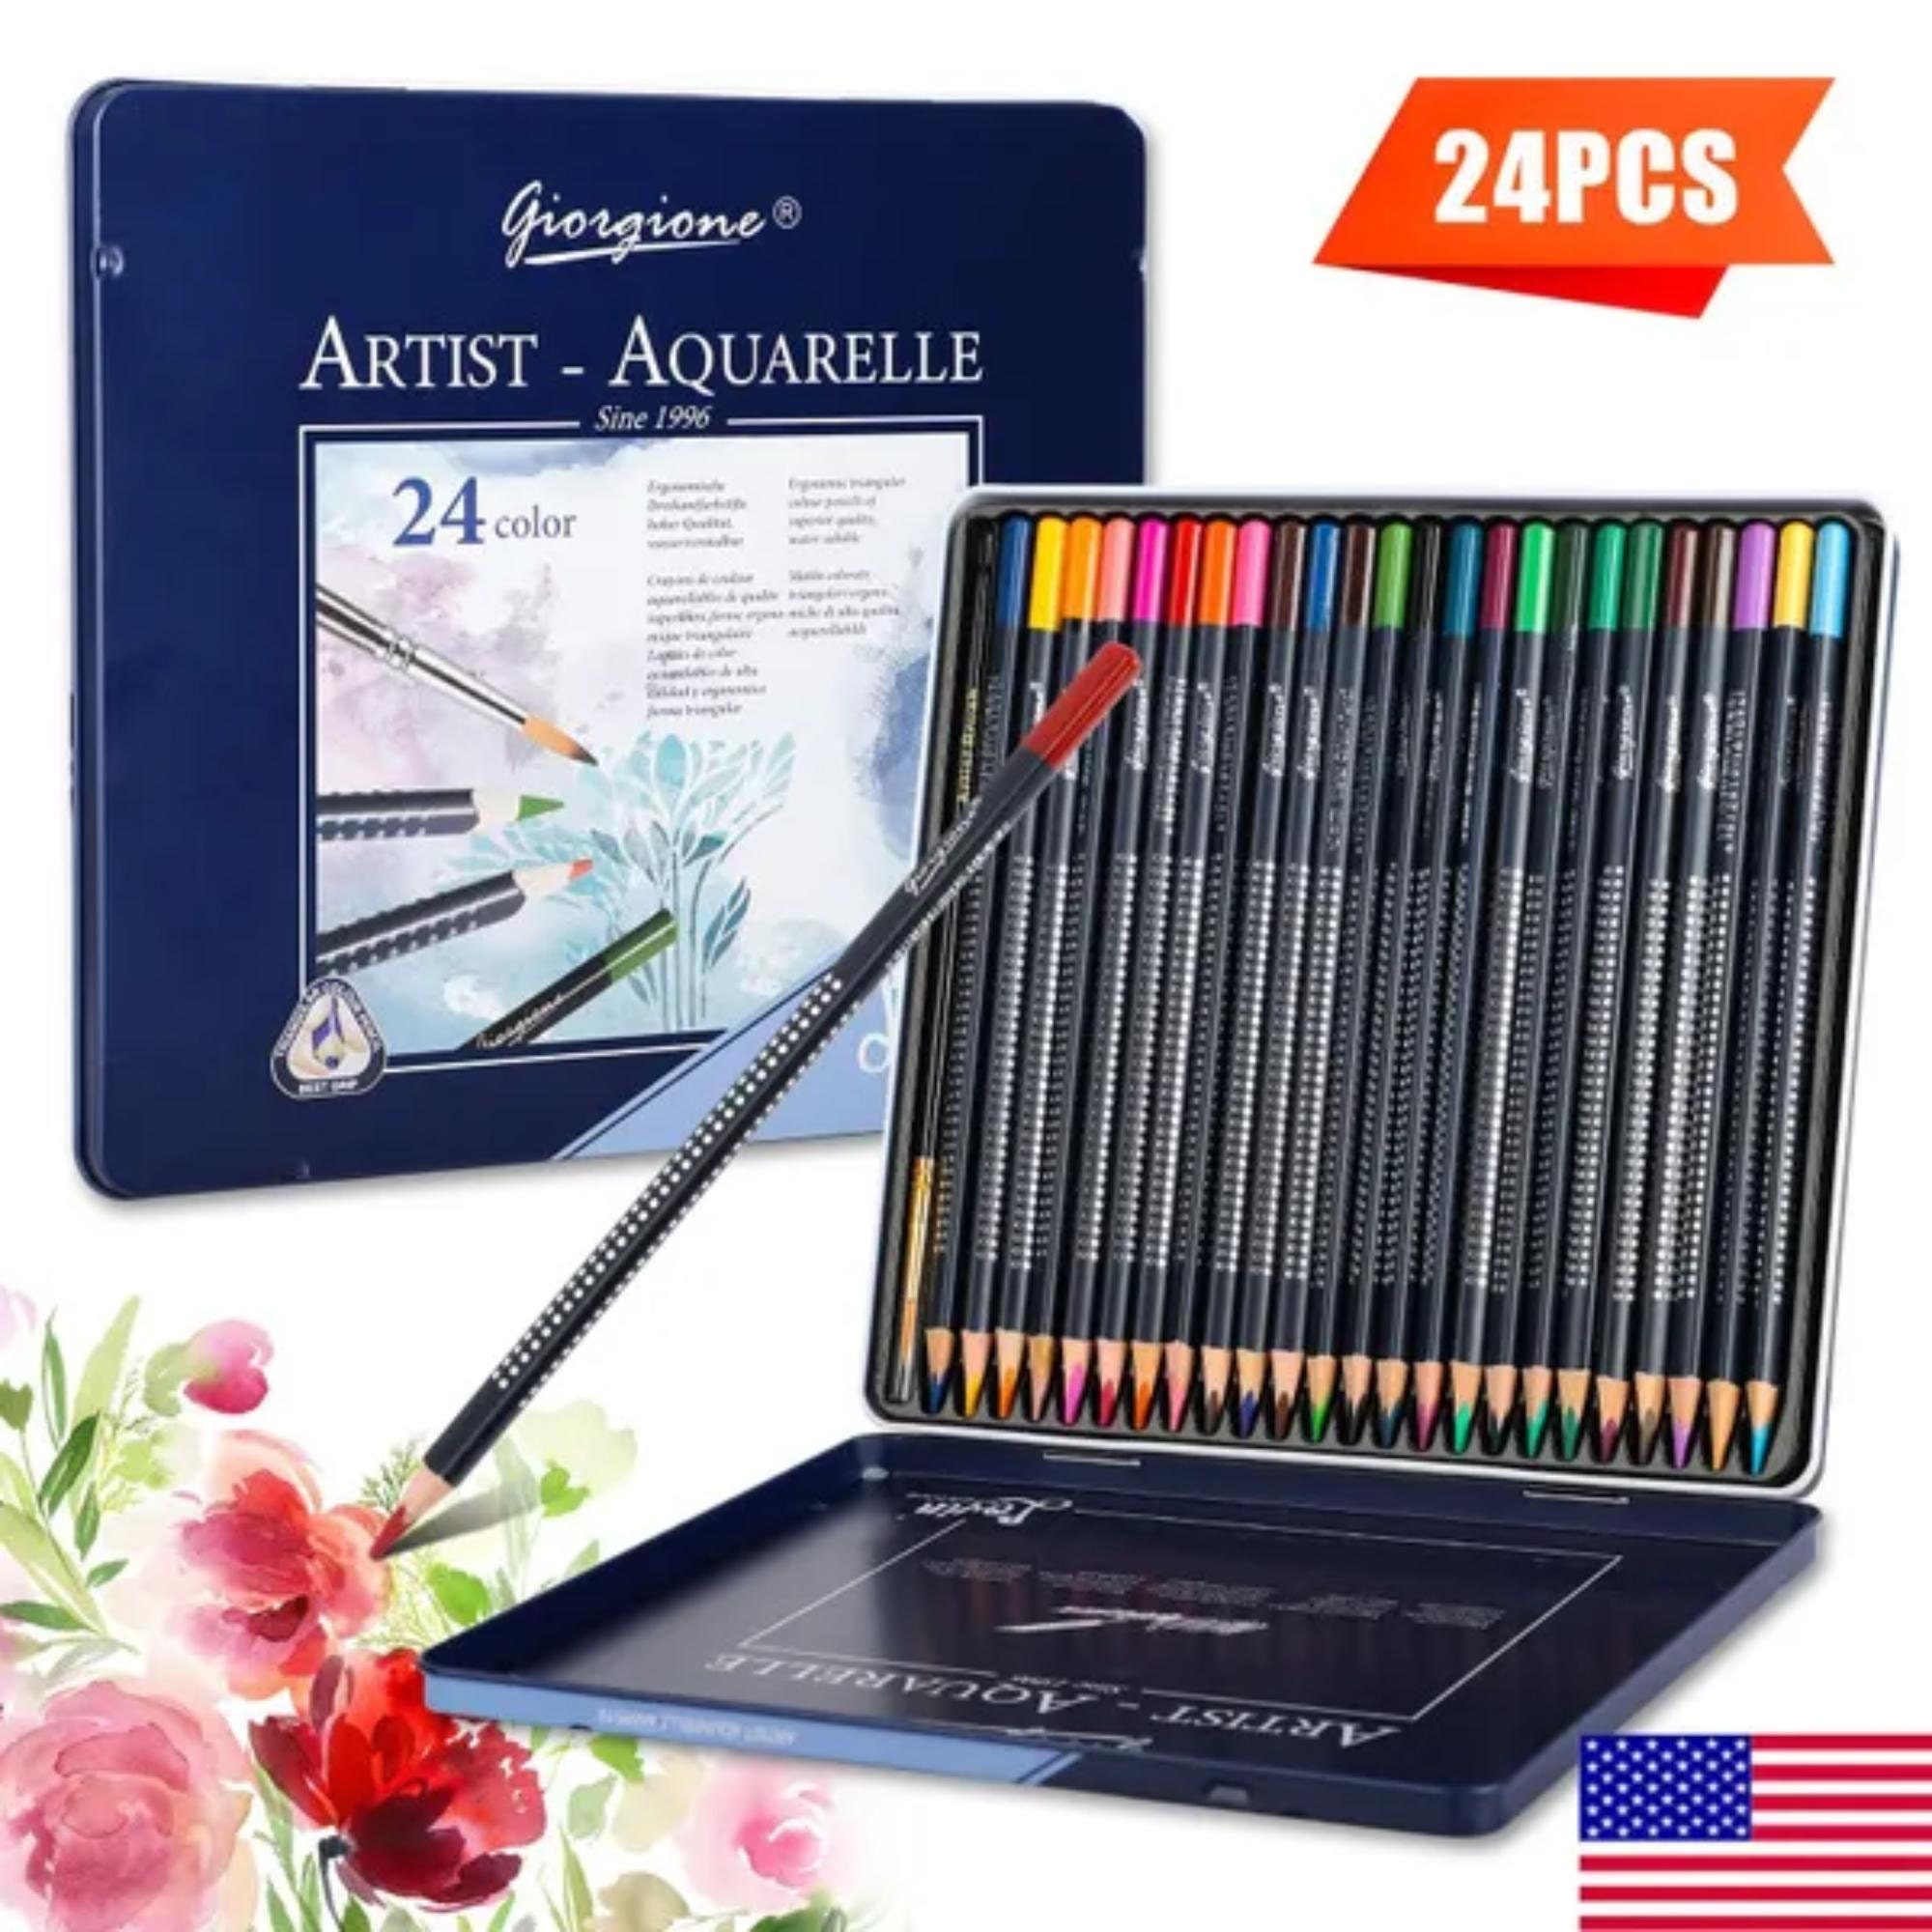 46 Pcs Professional Colored Pencils in Stylish Roll-up Storage Case, US  Edition Colored Pencils for Adults/kids , Colour Pencil Gift Box Set 